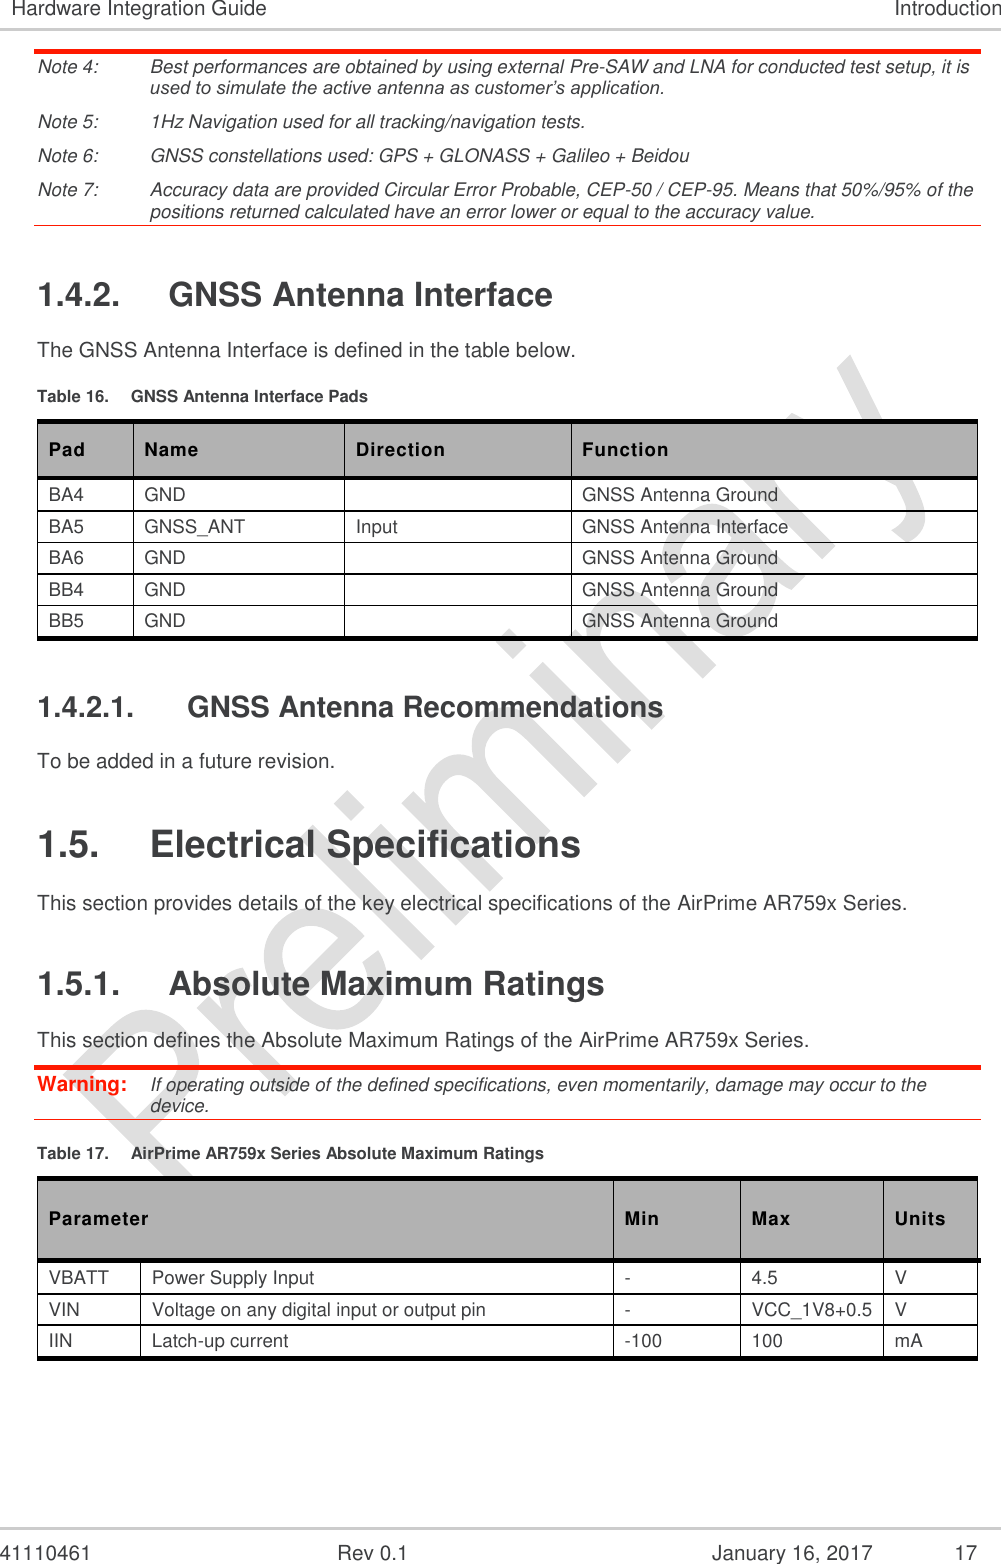  41110461  Rev 0.1  January 16, 2017  17 Hardware Integration Guide Introduction Note 4:  Best performances are obtained by using external Pre-SAW and LNA for conducted test setup, it is used to simulate the active antenna as customer’s application.  Note 5:  1Hz Navigation used for all tracking/navigation tests. Note 6:  GNSS constellations used: GPS + GLONASS + Galileo + Beidou Note 7:  Accuracy data are provided Circular Error Probable, CEP-50 / CEP-95. Means that 50%/95% of the positions returned calculated have an error lower or equal to the accuracy value. 1.4.2.  GNSS Antenna Interface The GNSS Antenna Interface is defined in the table below. Table 16.  GNSS Antenna Interface Pads Pad Name Direction Function BA4 GND   GNSS Antenna Ground BA5 GNSS_ANT Input GNSS Antenna Interface BA6 GND   GNSS Antenna Ground BB4 GND   GNSS Antenna Ground BB5 GND   GNSS Antenna Ground 1.4.2.1.  GNSS Antenna Recommendations To be added in a future revision. 1.5.  Electrical Specifications This section provides details of the key electrical specifications of the AirPrime AR759x Series. 1.5.1.  Absolute Maximum Ratings This section defines the Absolute Maximum Ratings of the AirPrime AR759x Series. Warning:   If operating outside of the defined specifications, even momentarily, damage may occur to the device. Table 17.  AirPrime AR759x Series Absolute Maximum Ratings Parameter Min Max Units VBATT Power Supply Input - 4.5 V VIN Voltage on any digital input or output pin - VCC_1V8+0.5 V IIN Latch-up current -100 100 mA 